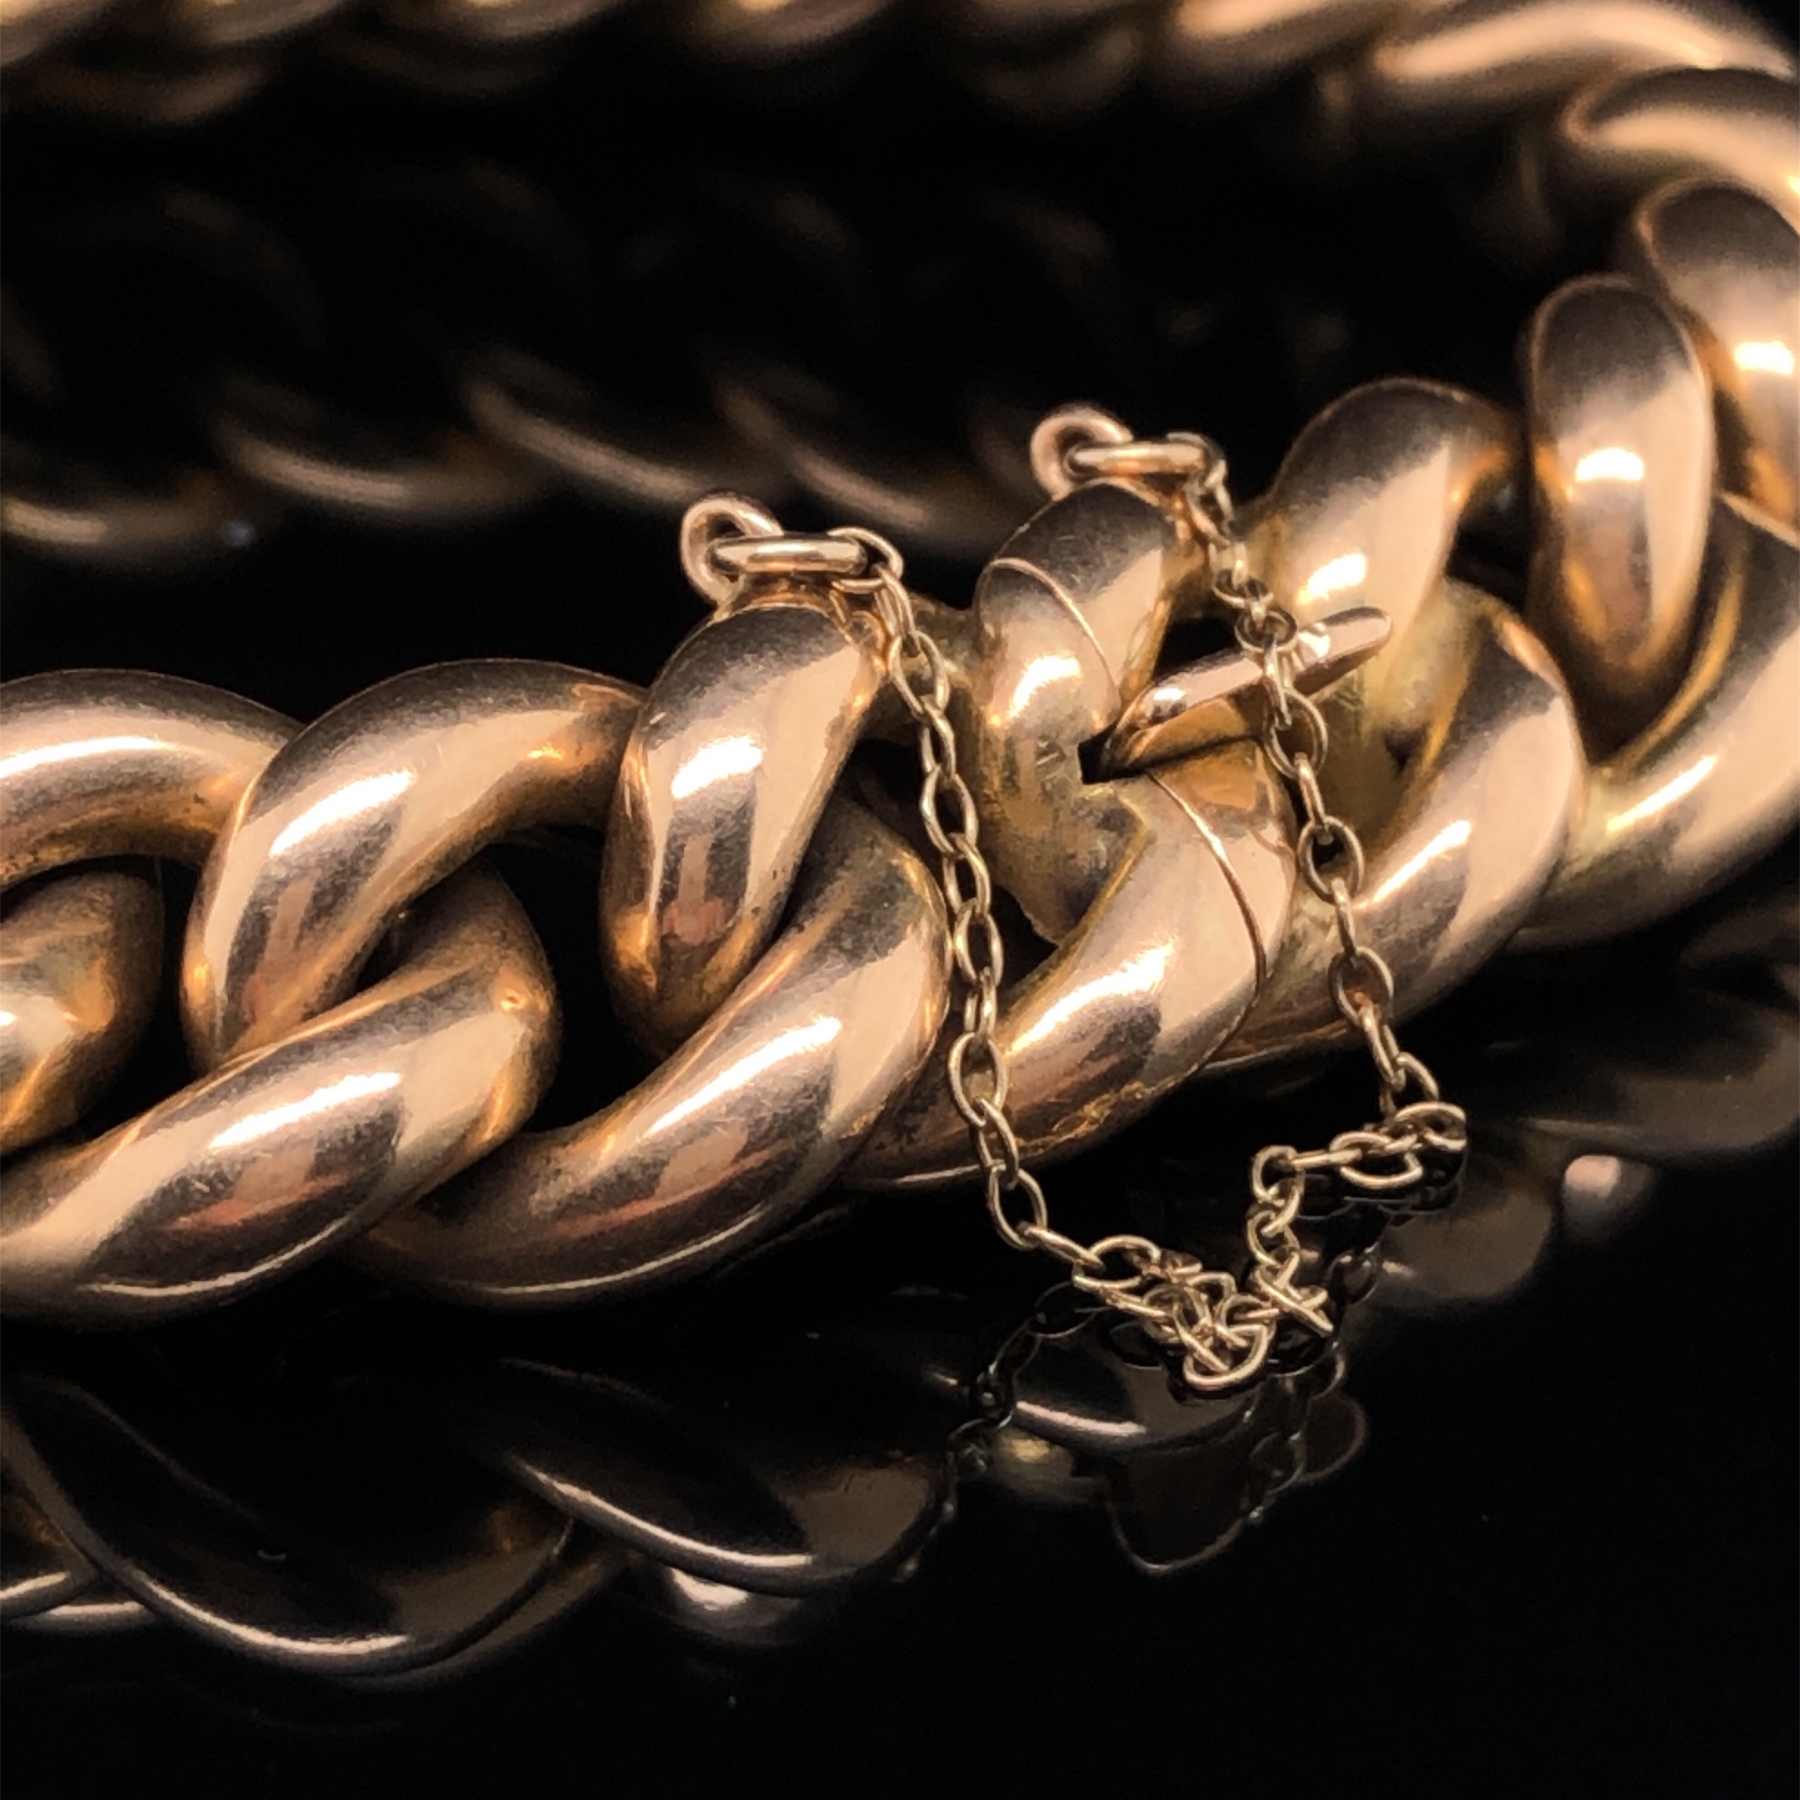 AN EDWARDIAN 15ct GOLD CURB BRACELET, COMPLETE WITH INTEGRAL CLASP AND SAFETY CHAIN. LENGTH APPROX - Image 4 of 5